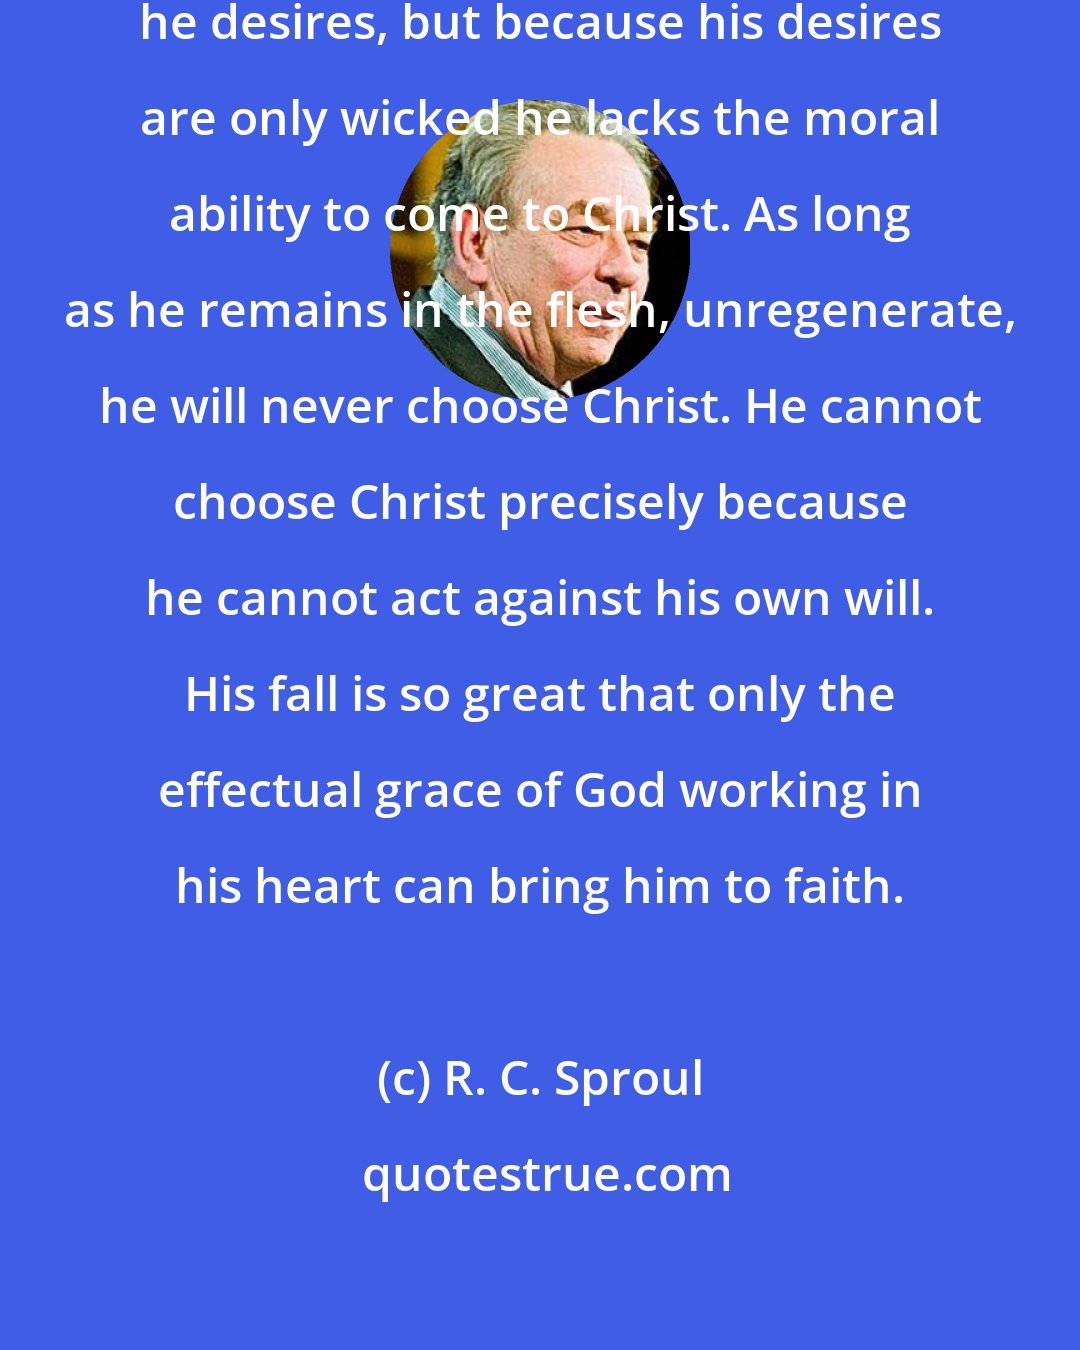 R. C. Sproul: Fallen man is free to choose what he desires, but because his desires are only wicked he lacks the moral ability to come to Christ. As long as he remains in the flesh, unregenerate, he will never choose Christ. He cannot choose Christ precisely because he cannot act against his own will. His fall is so great that only the effectual grace of God working in his heart can bring him to faith.